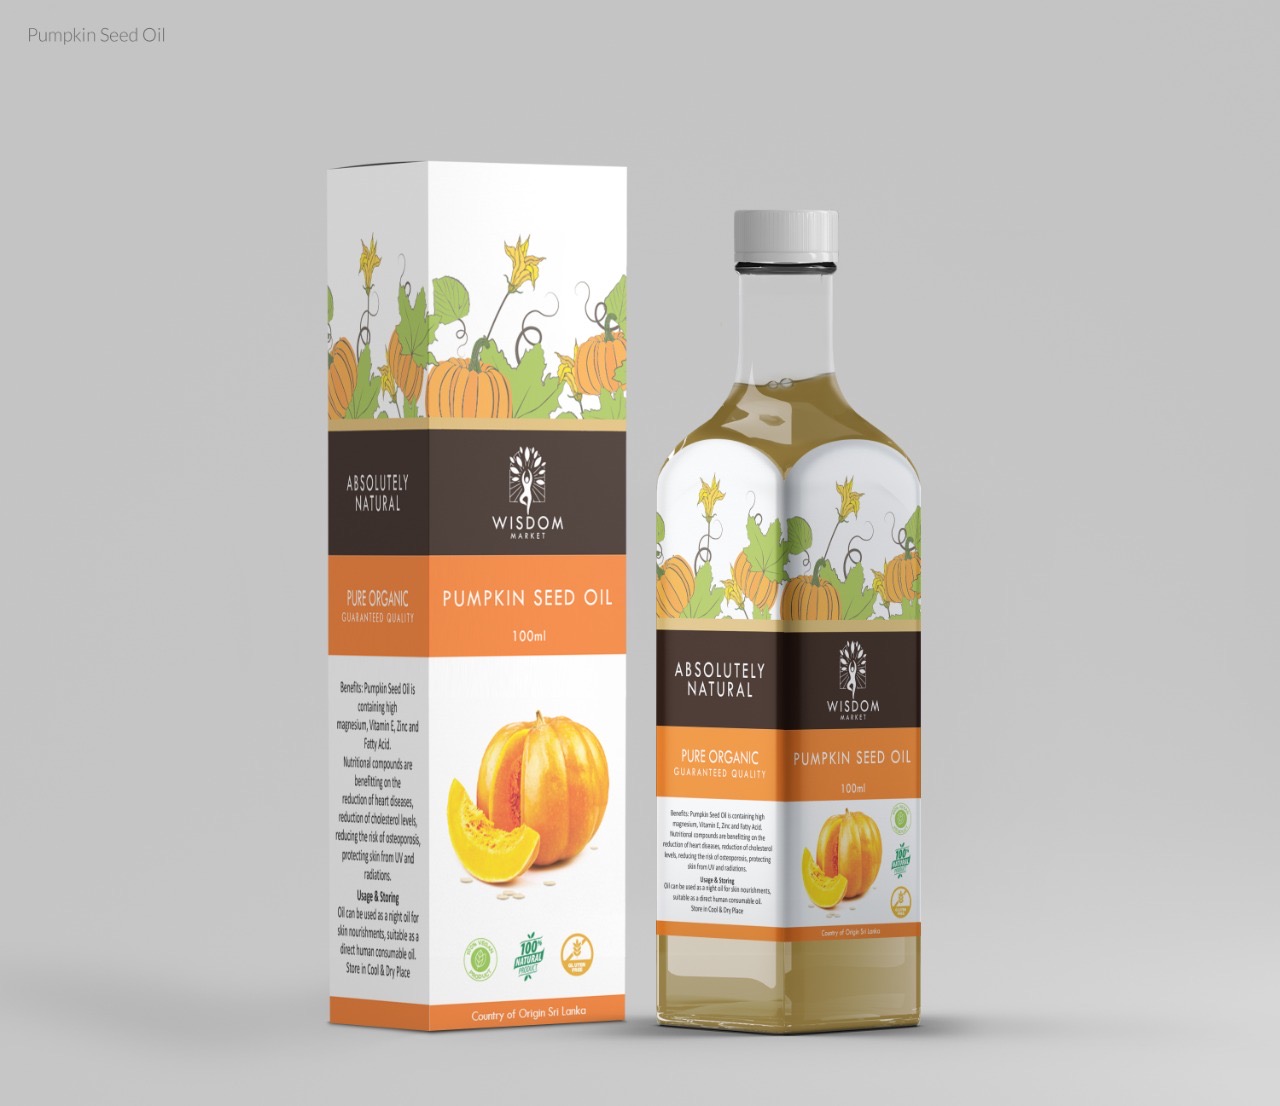 PUMPKIN SEED OIL - Ceylon Natural & Virgin 100% Pumpkin Seed Oil, Cold Pressed, 100ml, Salad dressings, or drizzled directly onto food